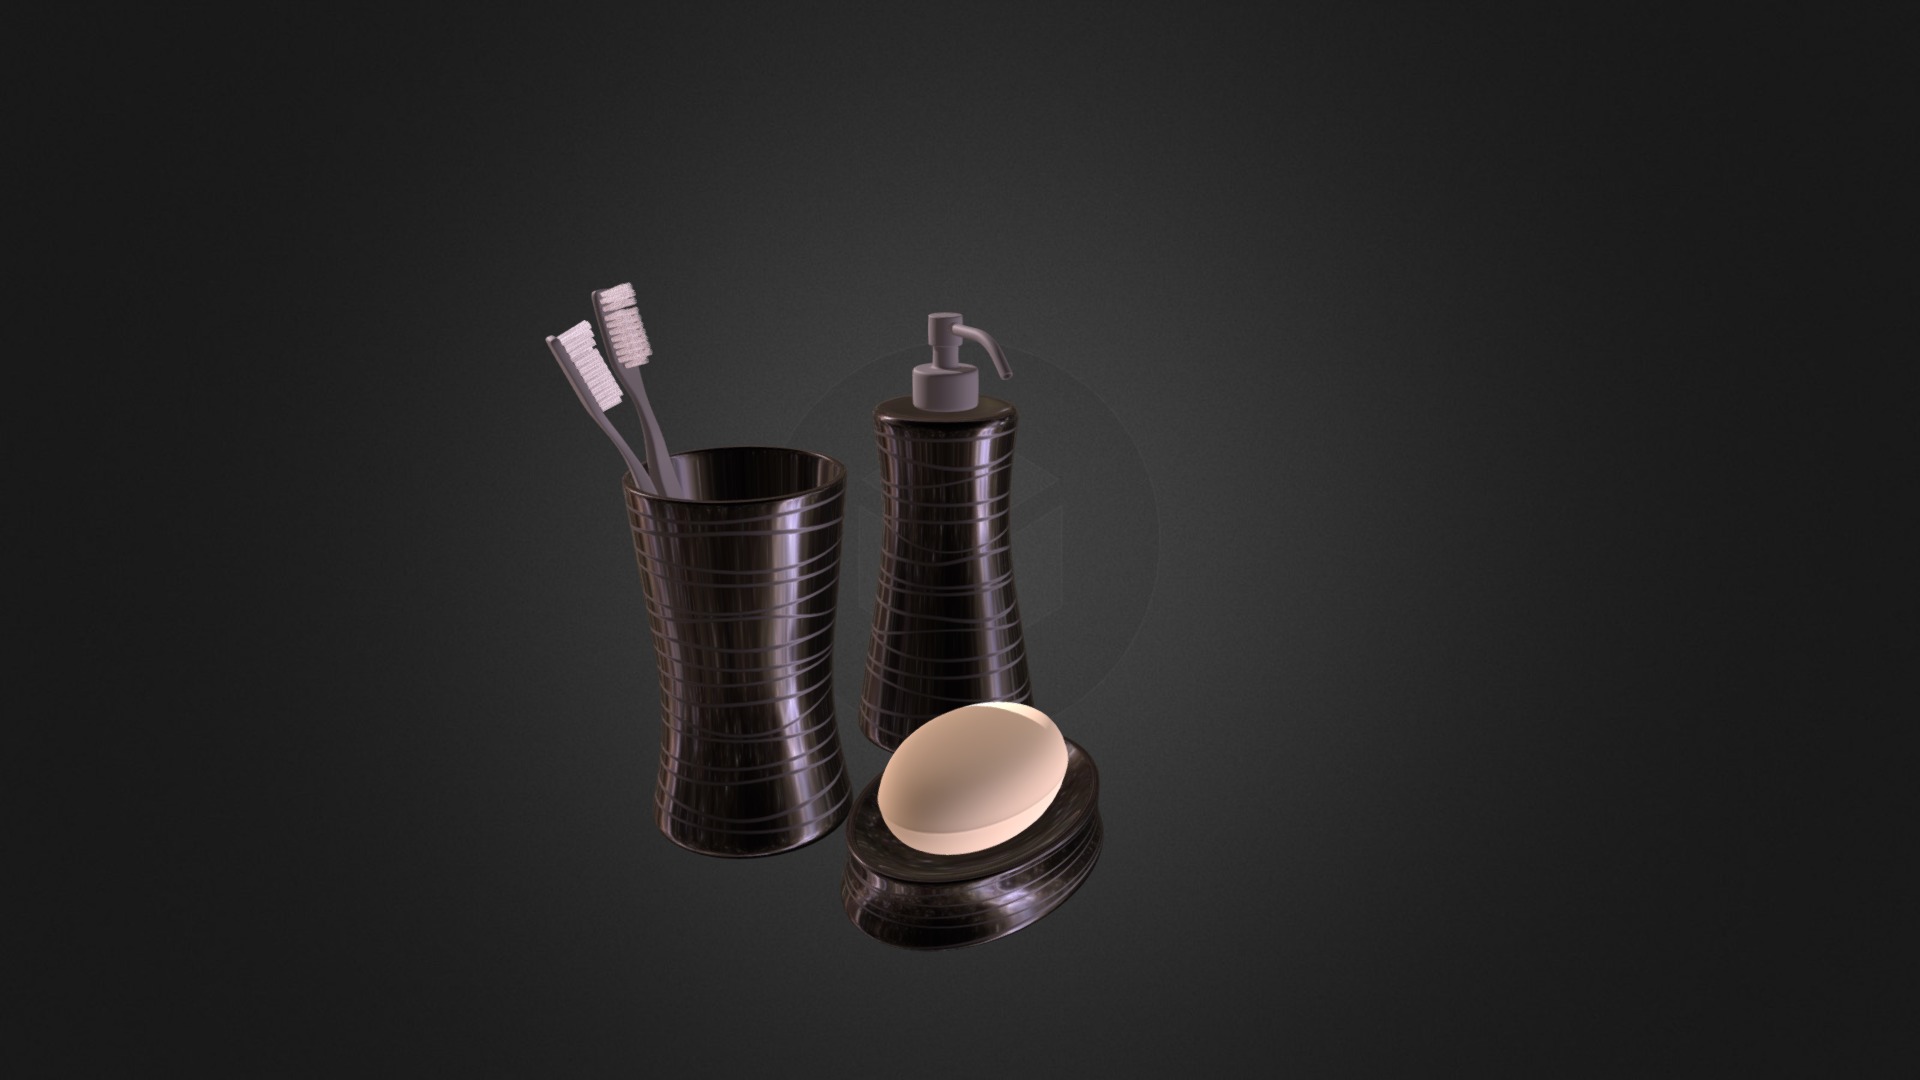 3D model Black Bathroom Fixtures - This is a 3D model of the Black Bathroom Fixtures. The 3D model is about a couple of brushes in a holder.